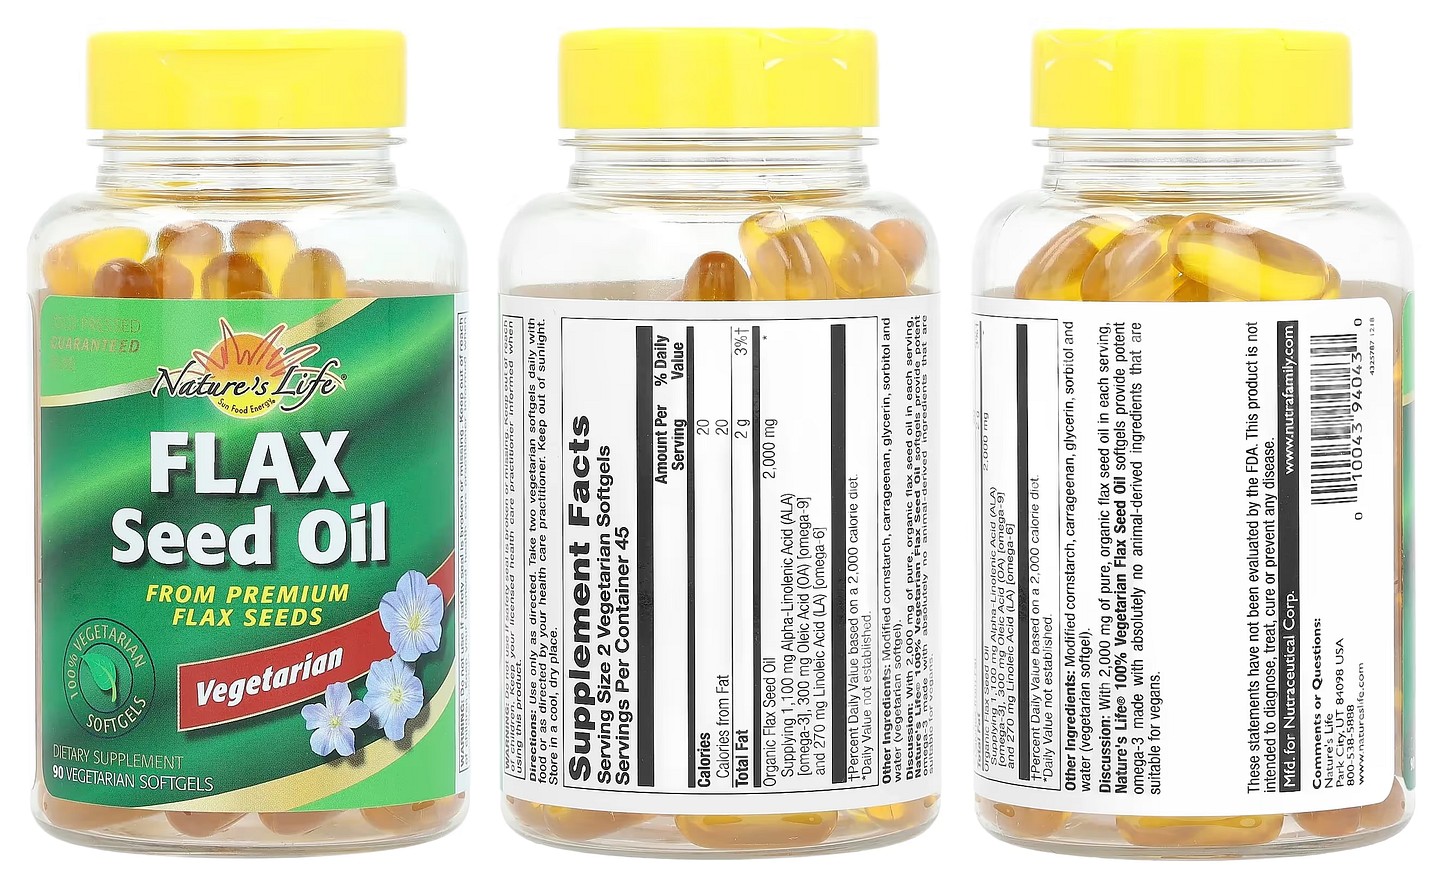 Nature's Life, Flax Seed Oil packaging